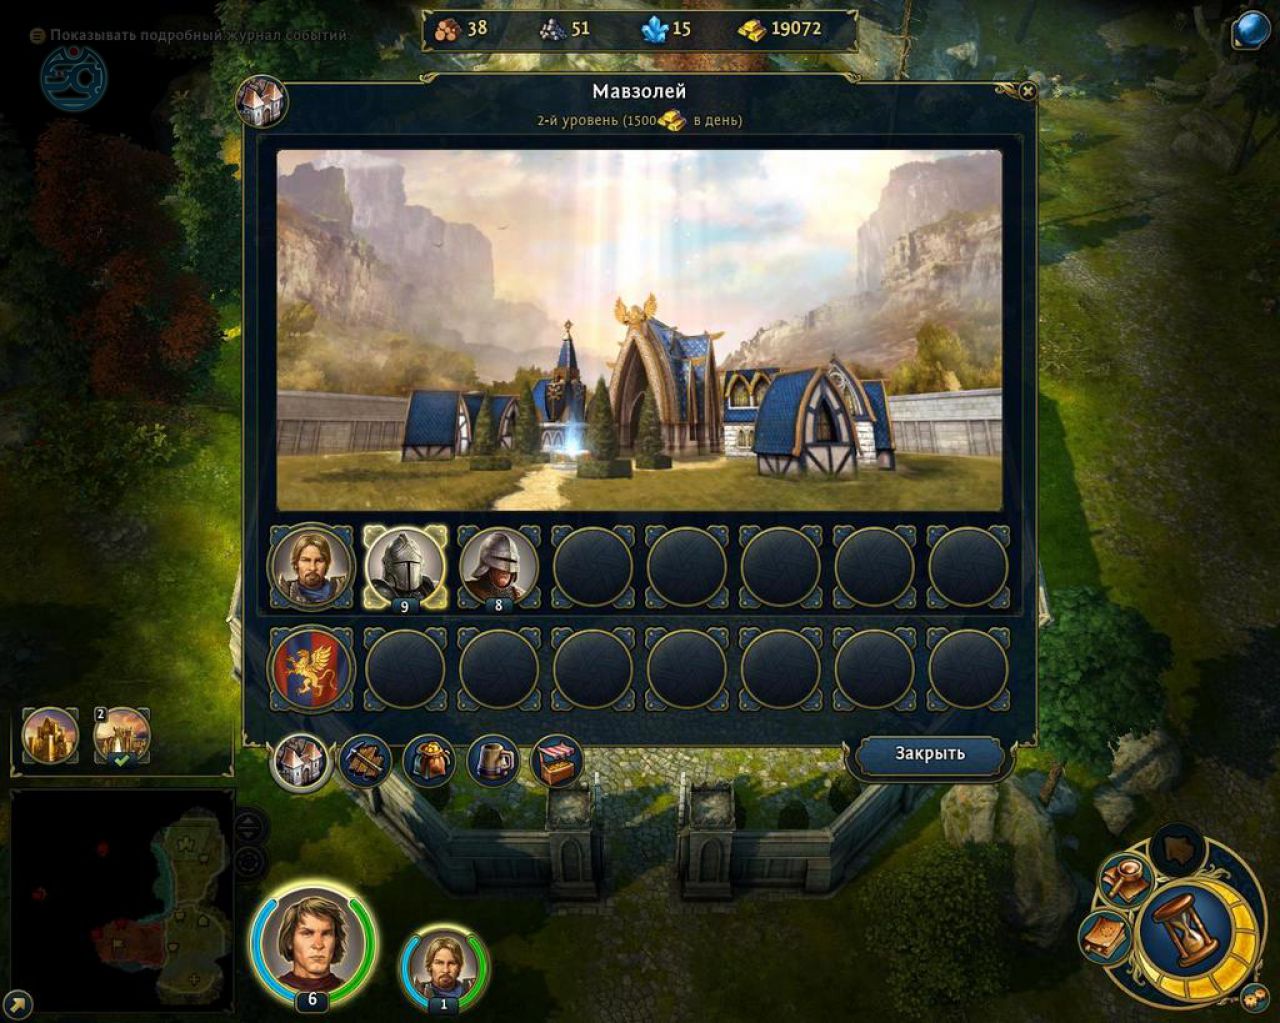 download heroes of might and magic 6 heroes for free